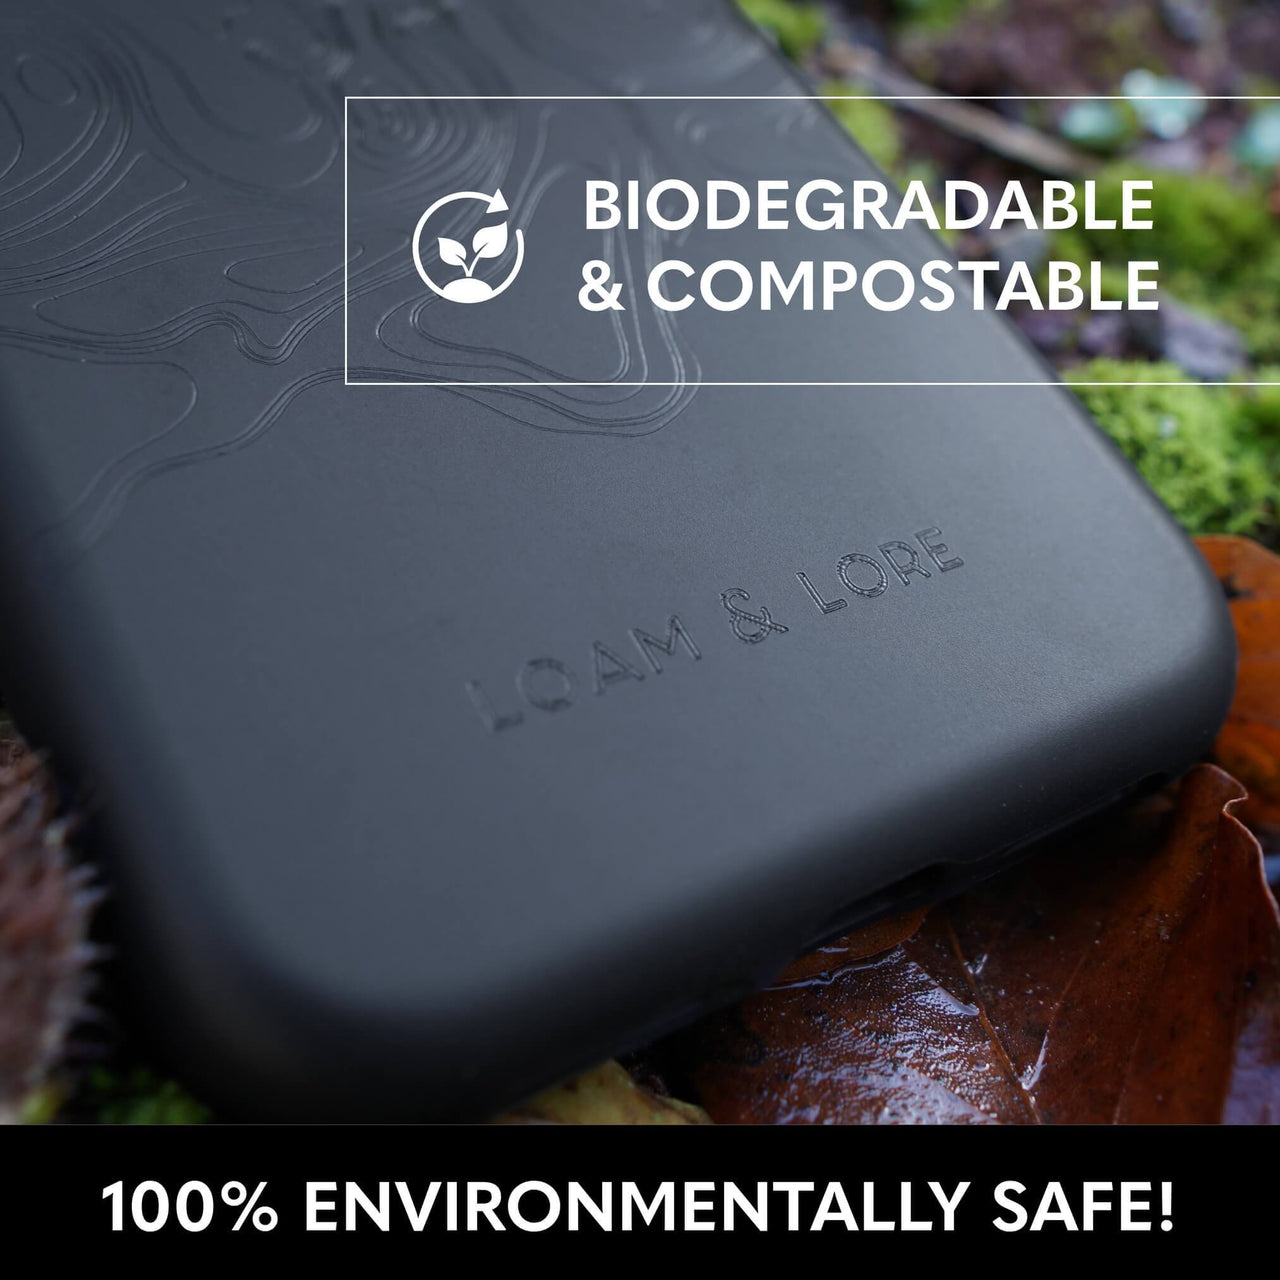 Eco Friendly Samsung Galaxy S10 case Compostable & Biodegradable - Loam & Lore